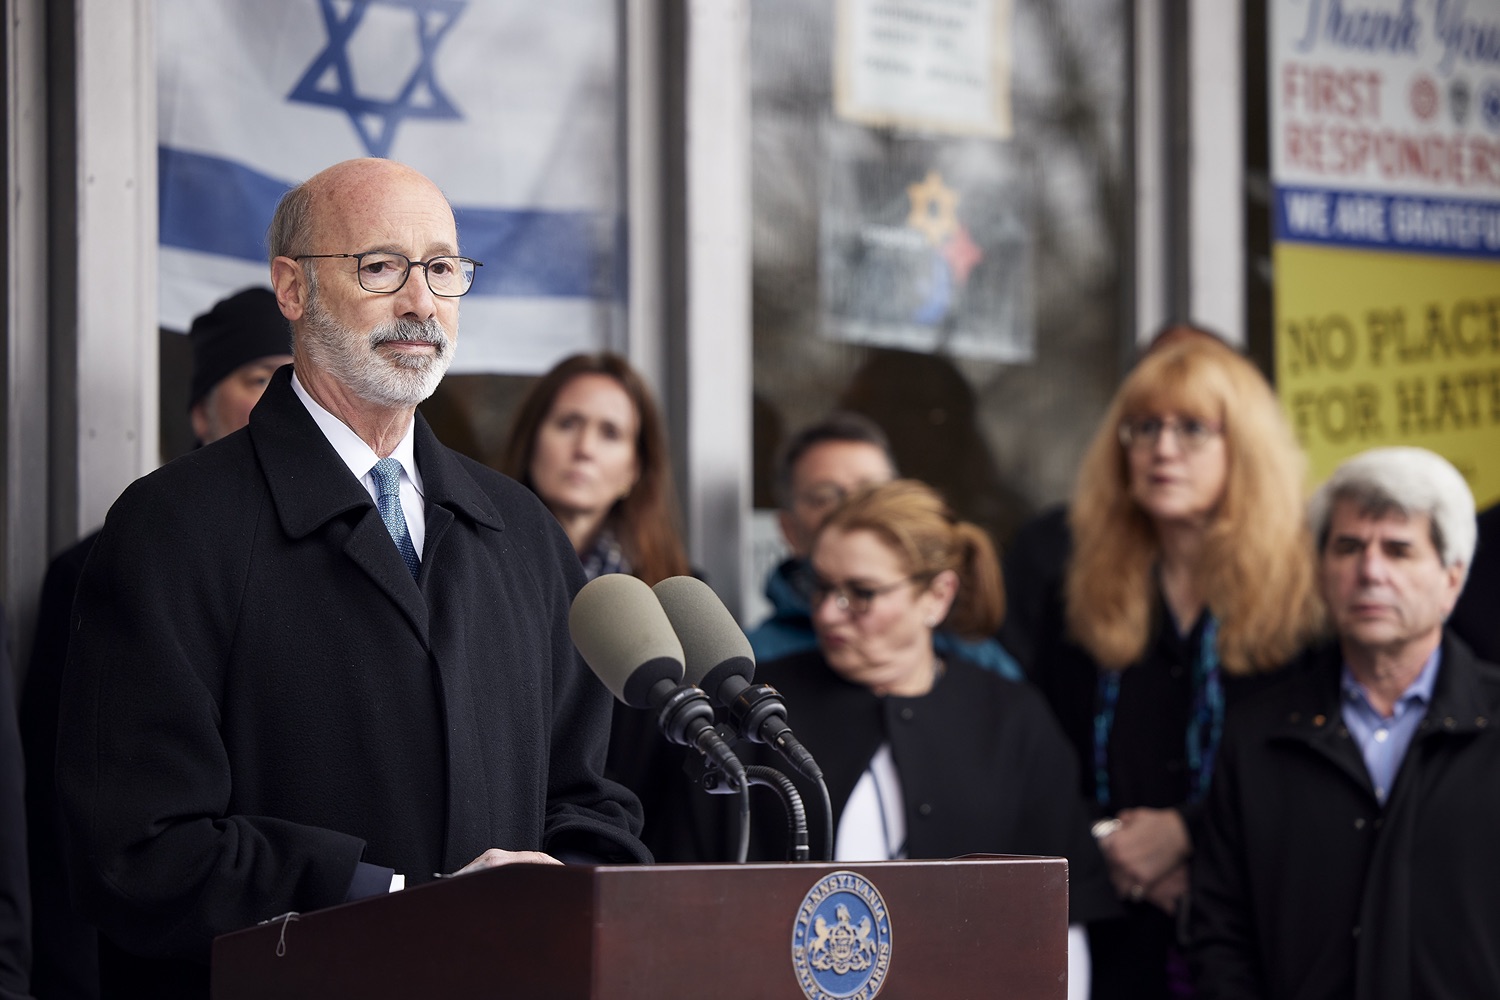 Pennsylvania Governor Tom Wolf speaking with the press.  Governor Tom Wolf visited the Tree of Life in Pittsburgh today to announce $6.6 million in state funding to support the rebuilding and reimagining of the synagogue. The governor was joined by Rabbi Jeffrey Myers, Senate Democratic Leader Jay Costa and members of the Tree of Lifes REMEMBER. REBUILD. RENEW campaign which will transform the site of the worst antisemitic attack in U.S. history into a new place of hope, remembrance, and education. Pittsburgh, PA - December 6, 2021<br><a href="https://filesource.amperwave.net/commonwealthofpa/photo/20308_gov_treeOfLife_dz_015_copy.jpg" target="_blank">⇣ Download Photo</a>